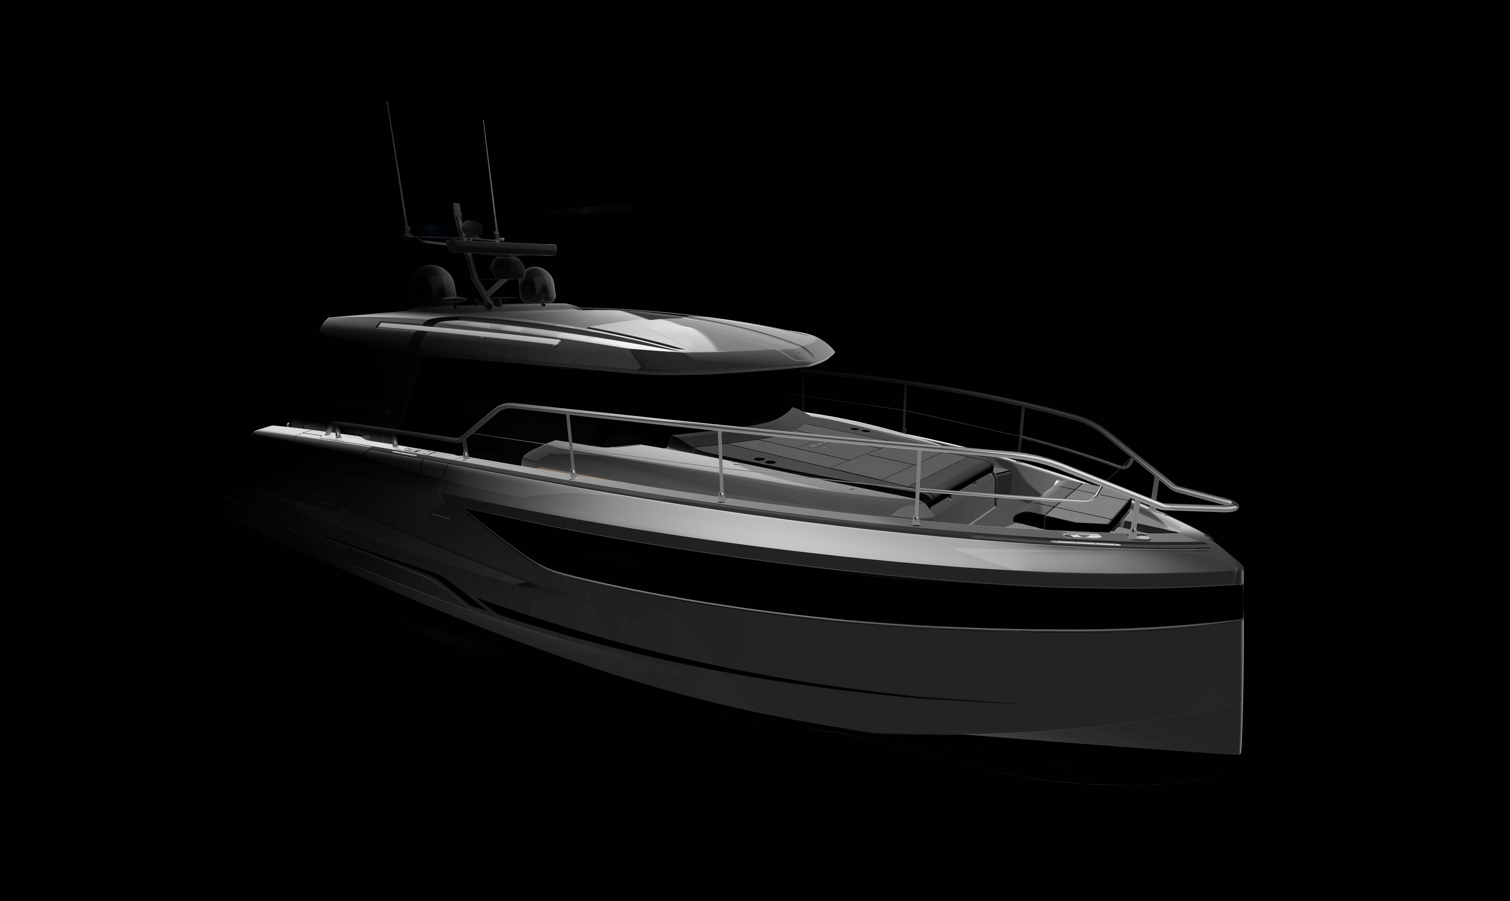 WELLCRAFT Announces its Largest Performance Cruiser